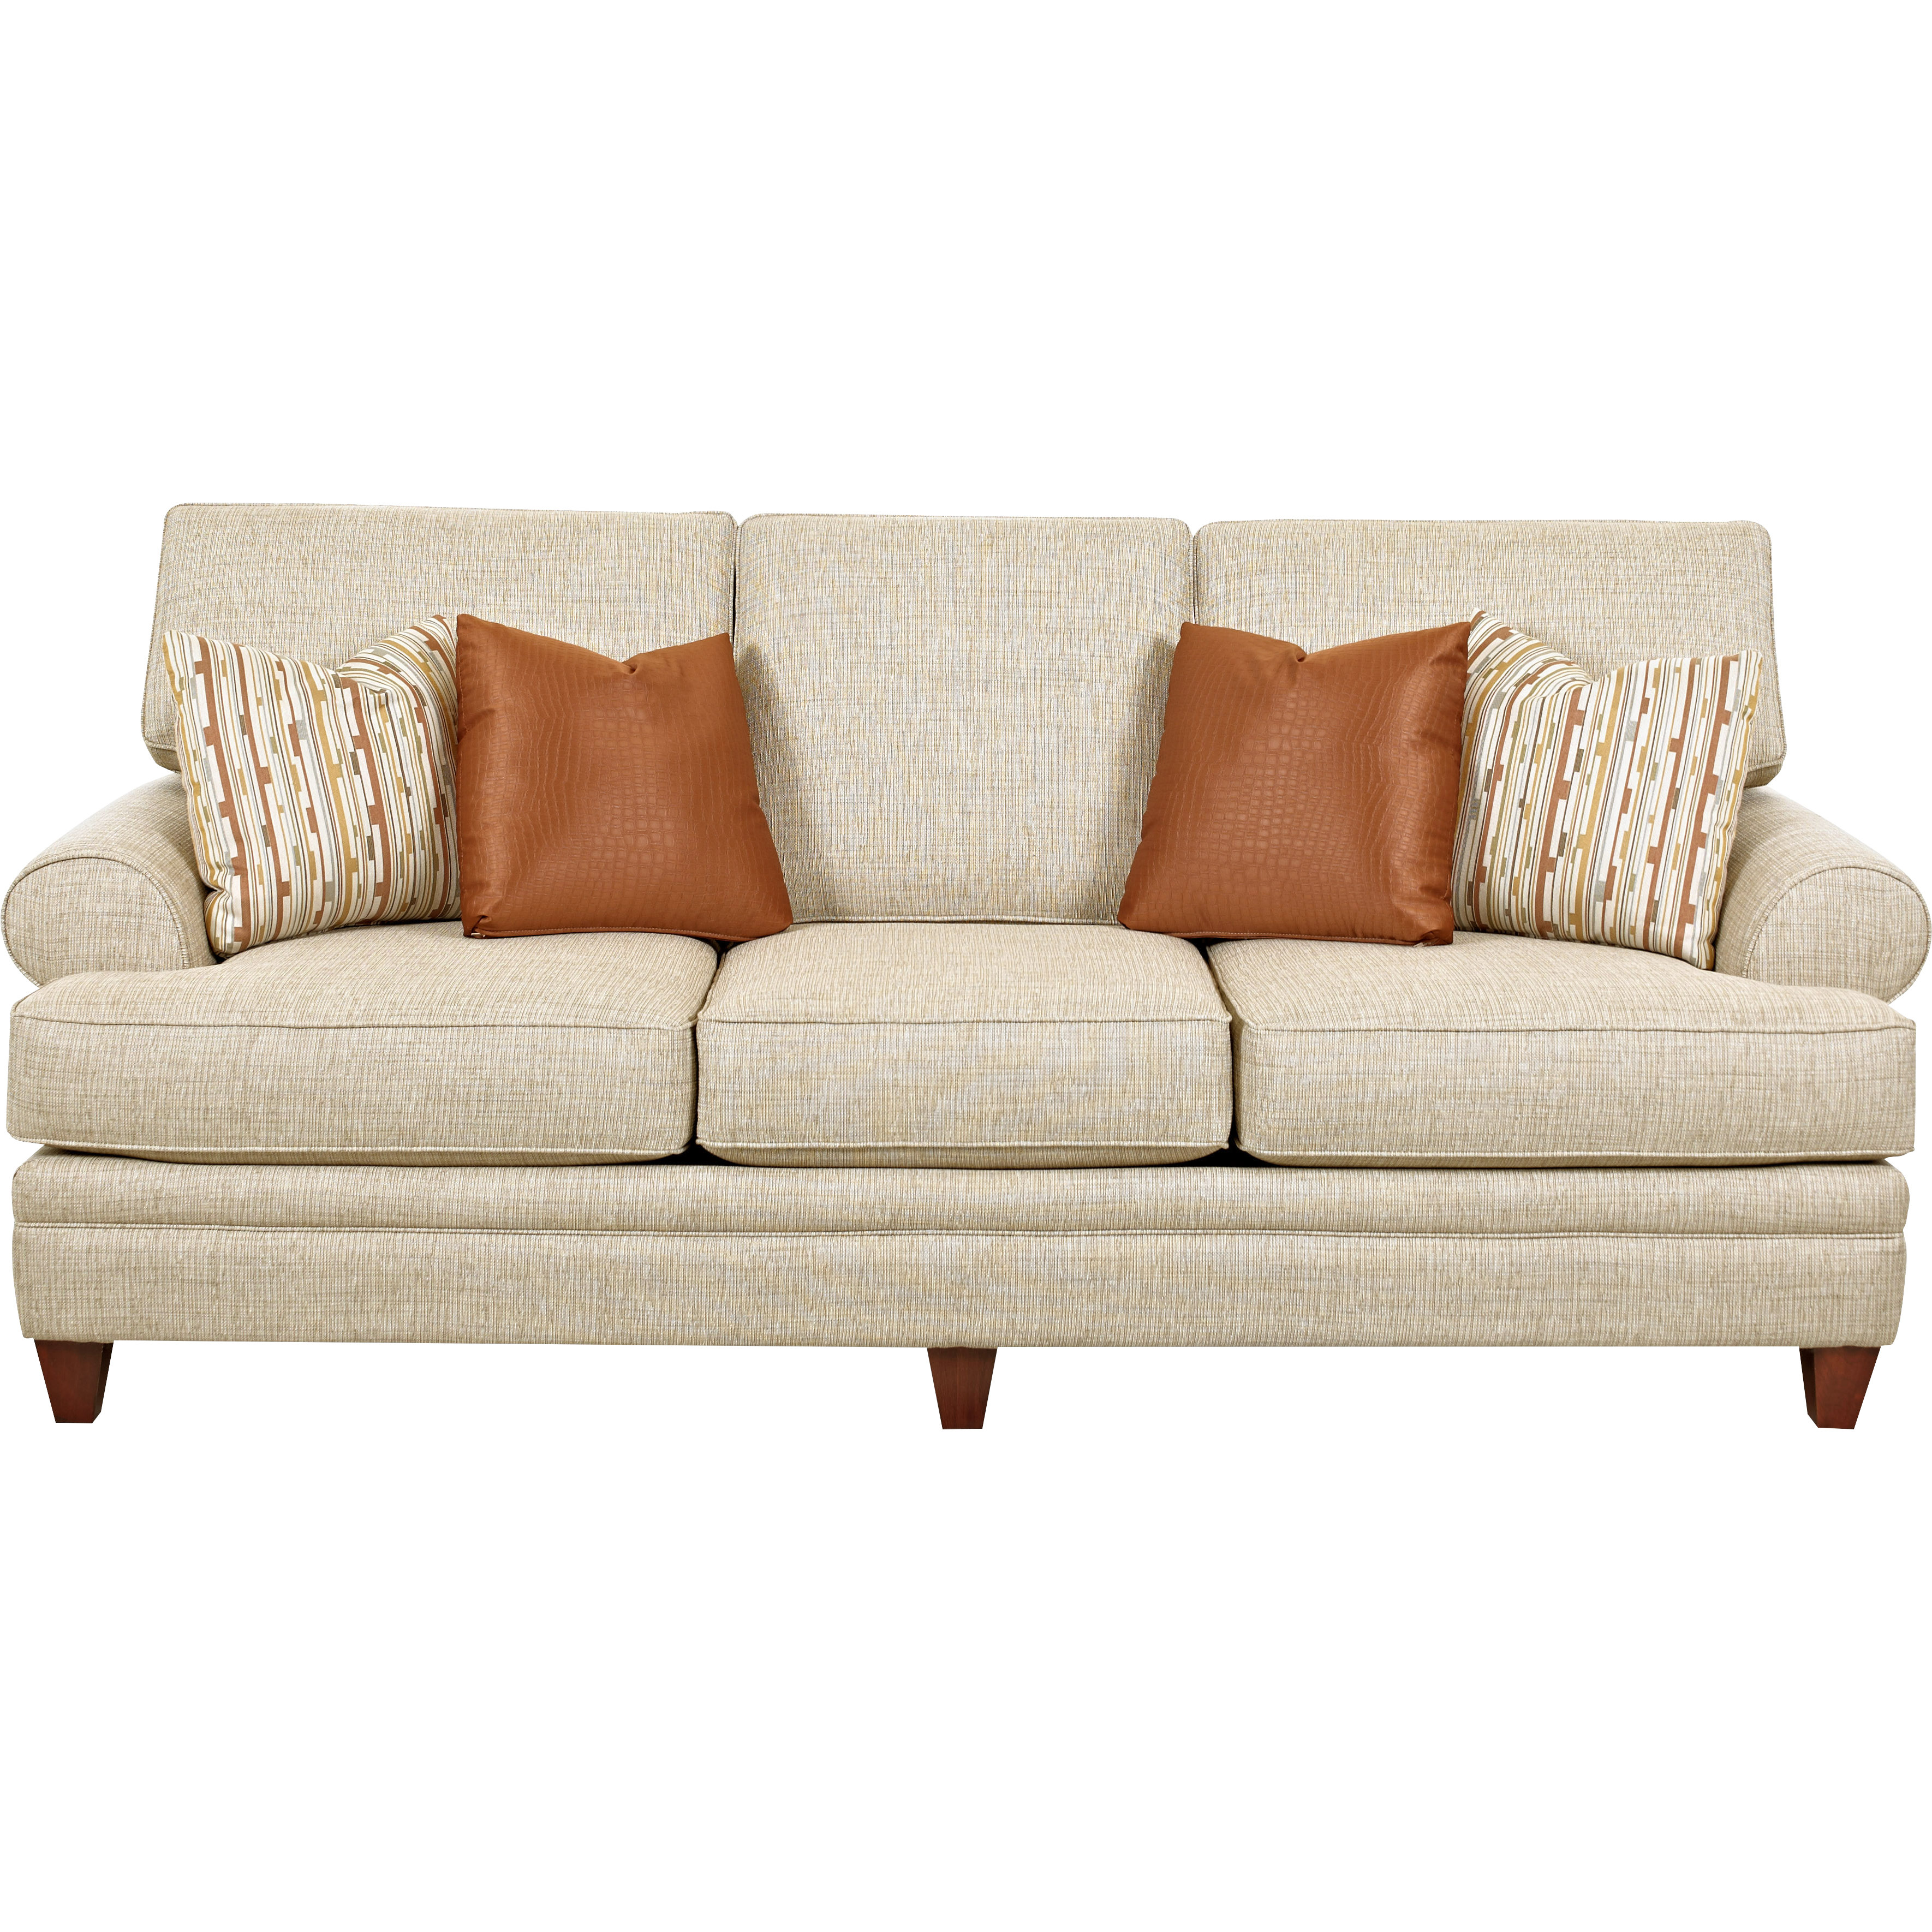 Klaussner Furniture Clayton Living Room Collection 